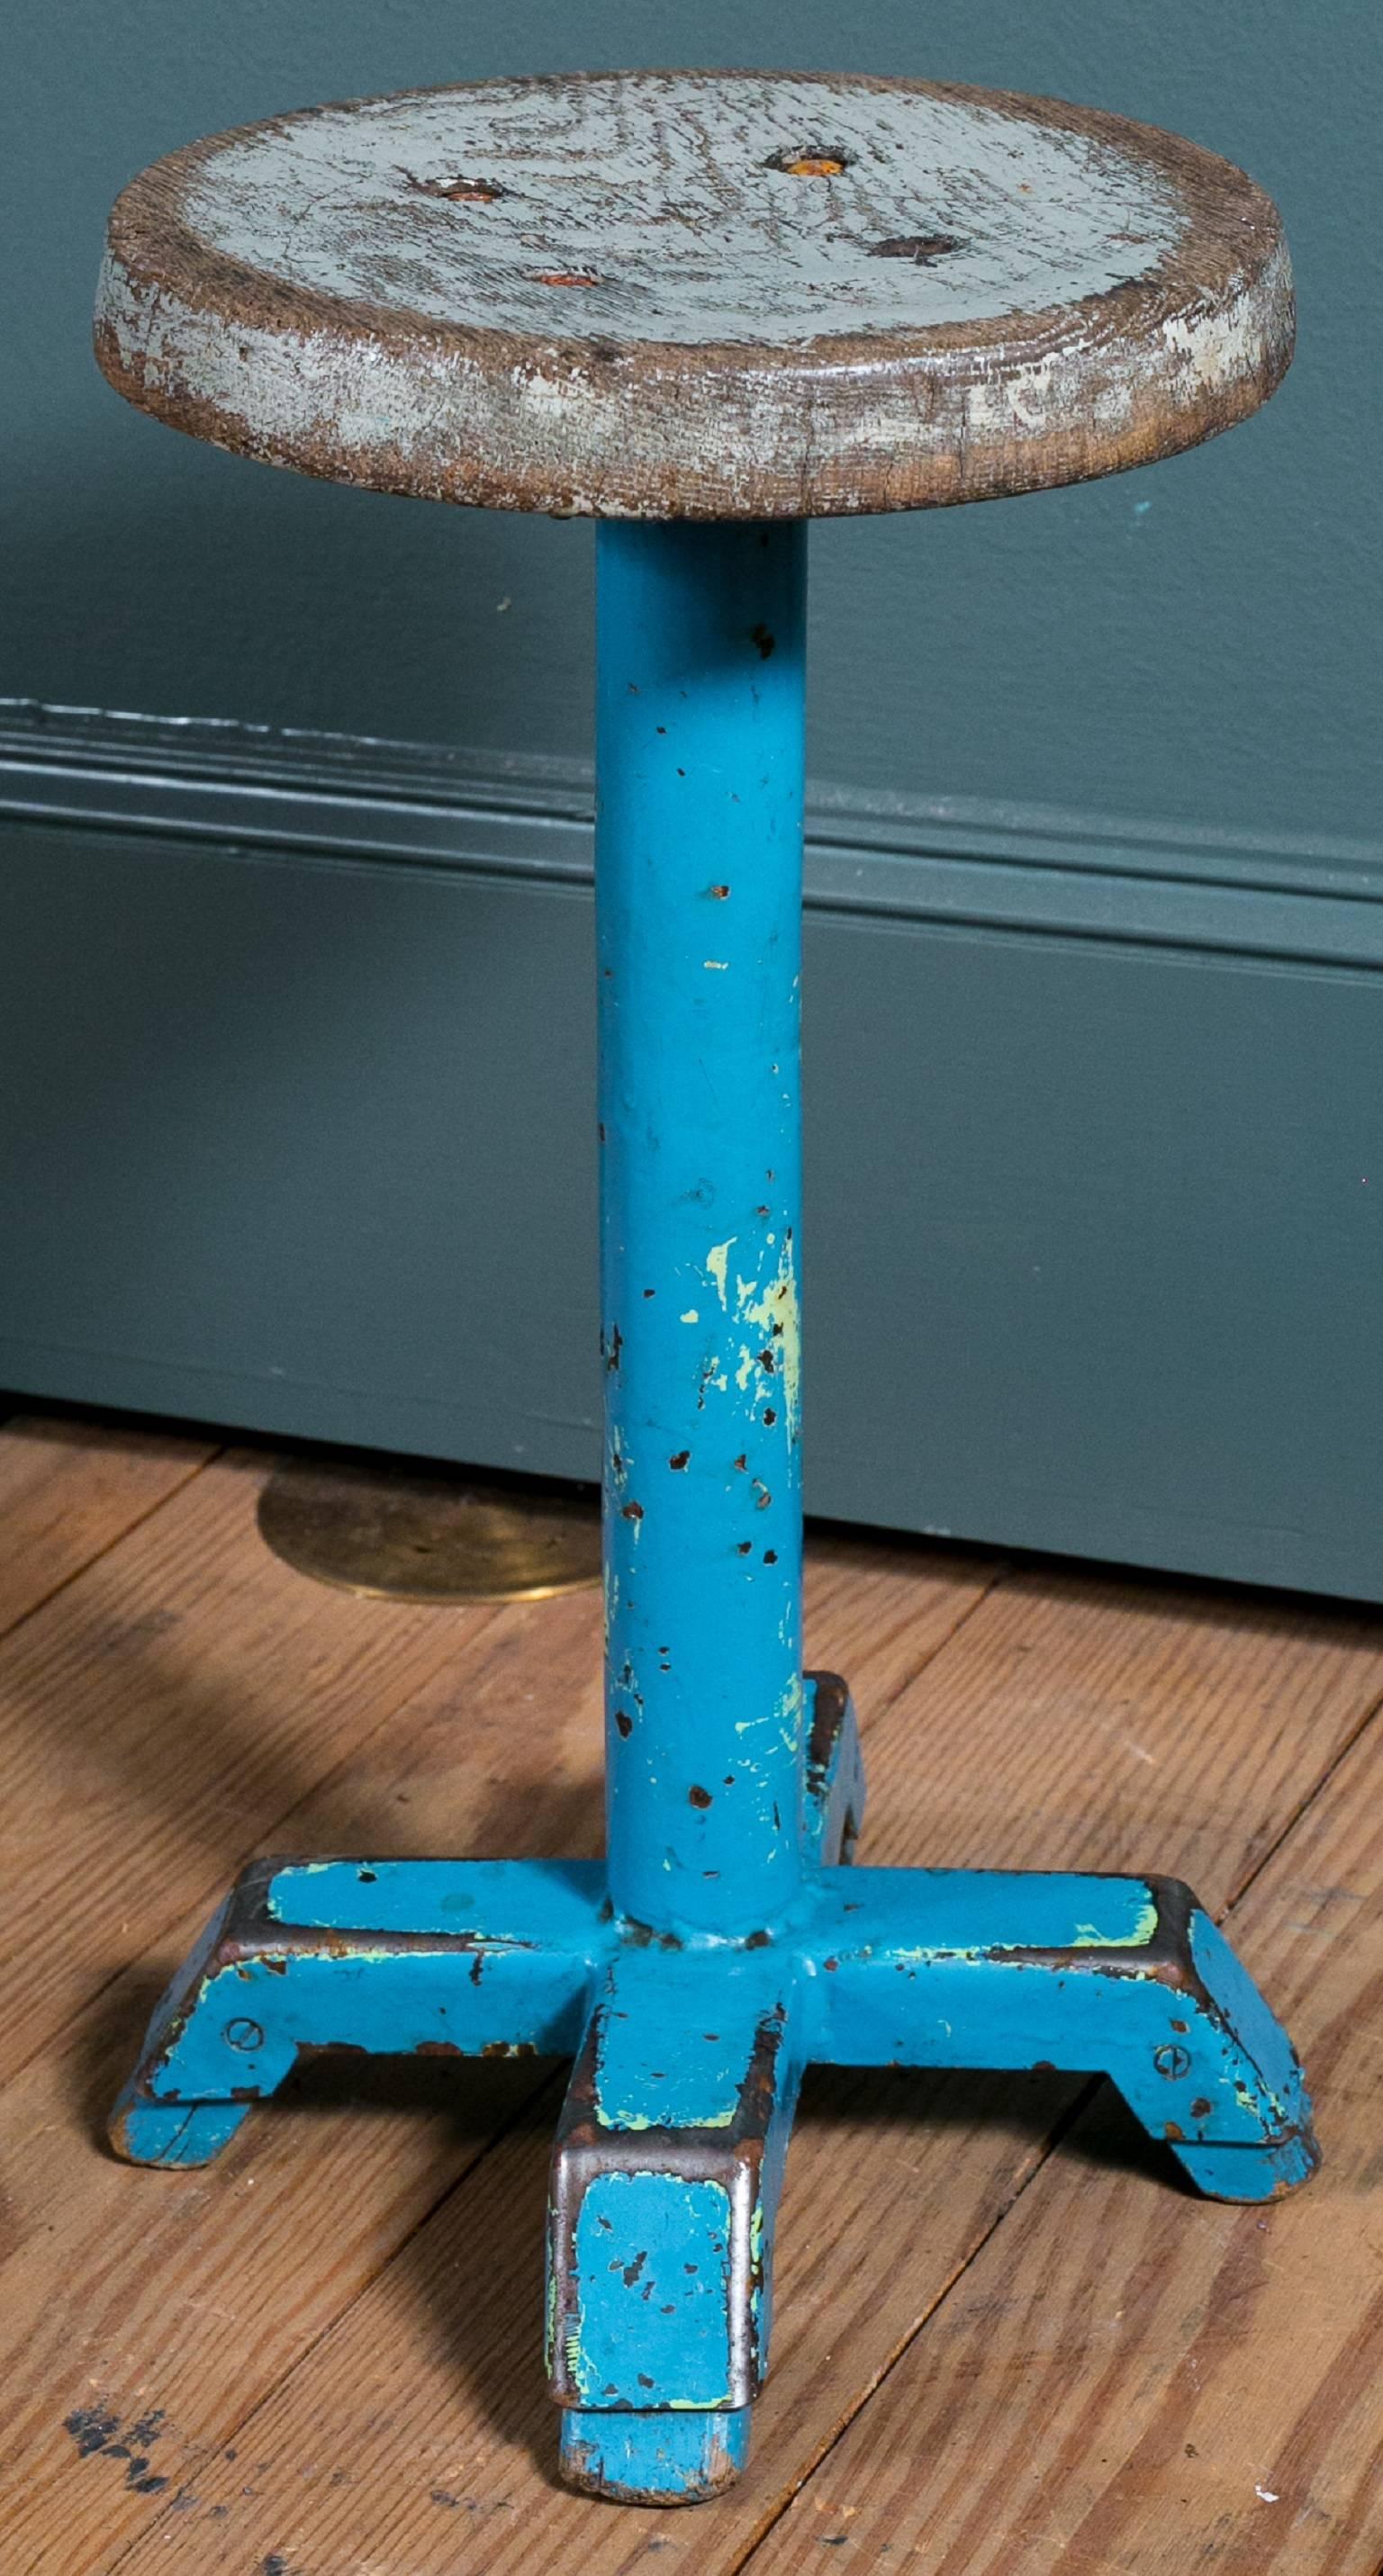 Charming painted iron stool with wooden seat from a Belgian school house. One blue available (red and green in photo have sold). Price is for one stool.  We have one green available with a newer wood top- not photographed.   Additional photos upon